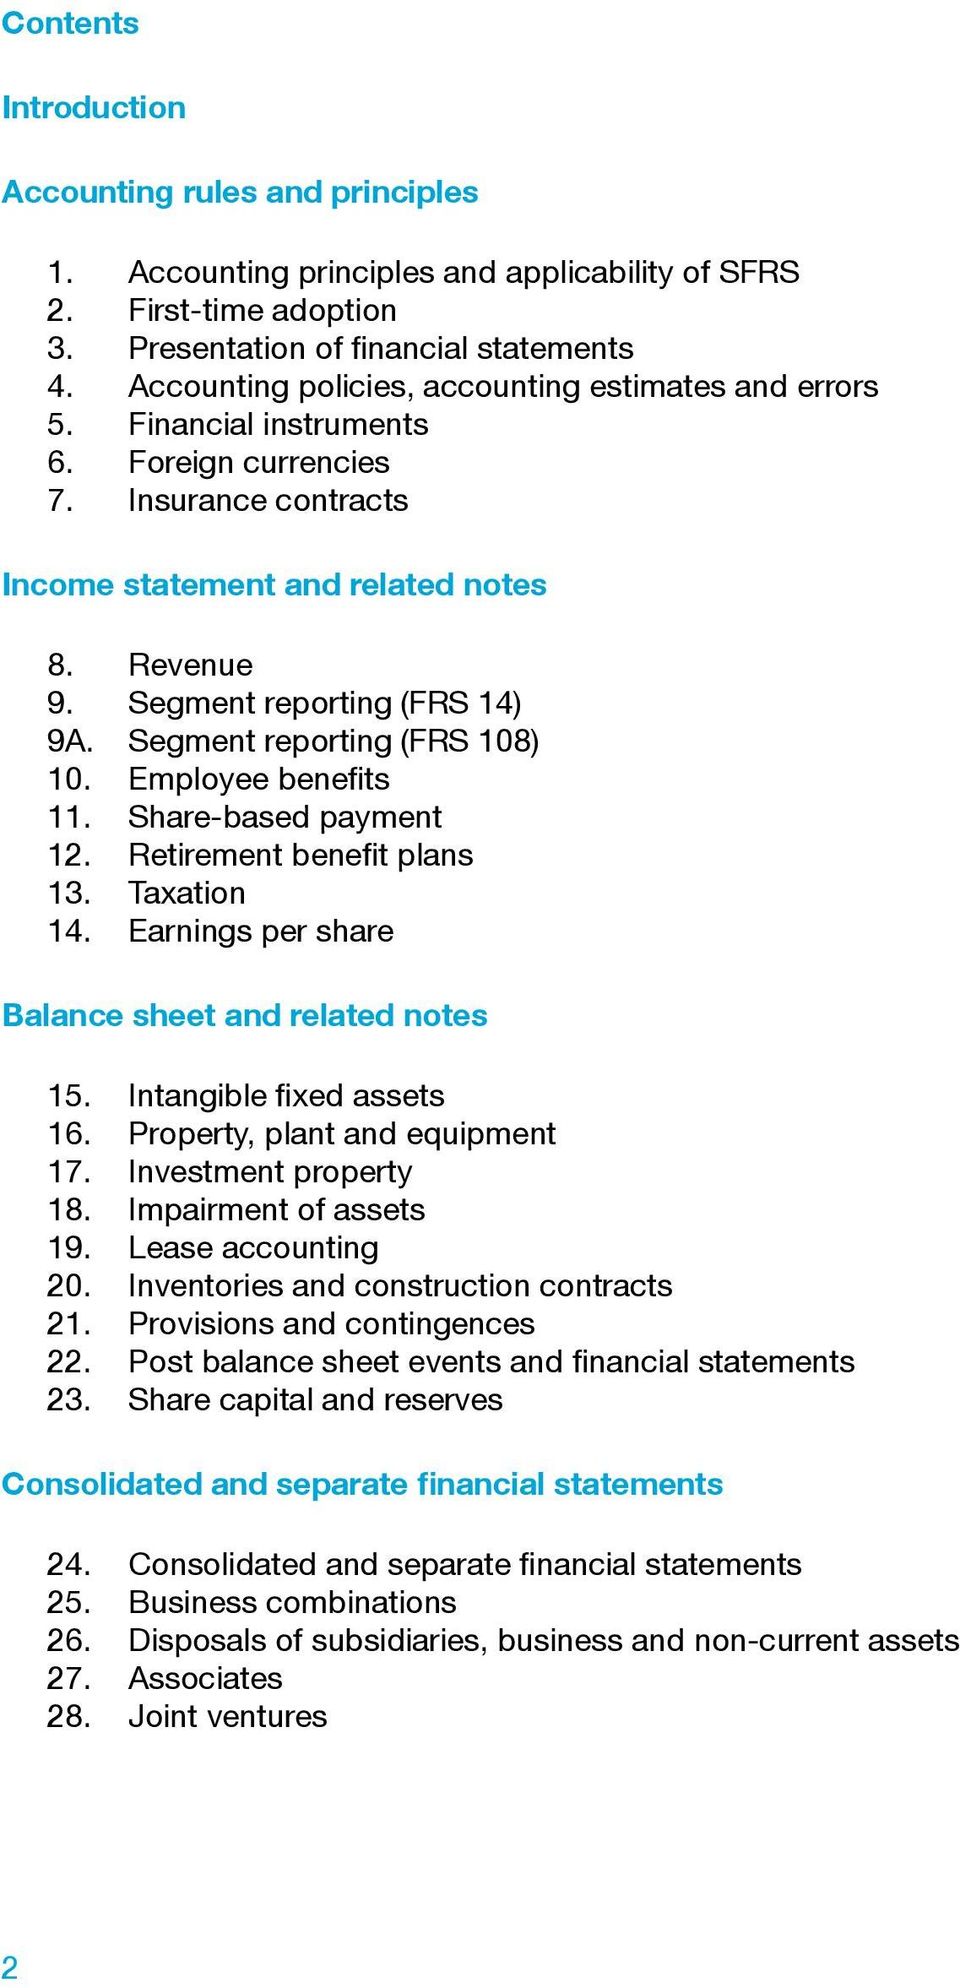 Insurance contracts Income statement and related notes 8. Revenue 9. Segment reporting (FRS 14) 9A. Segment reporting (FRS 108) 10. Employee benefits 11. Share-based payment 12.